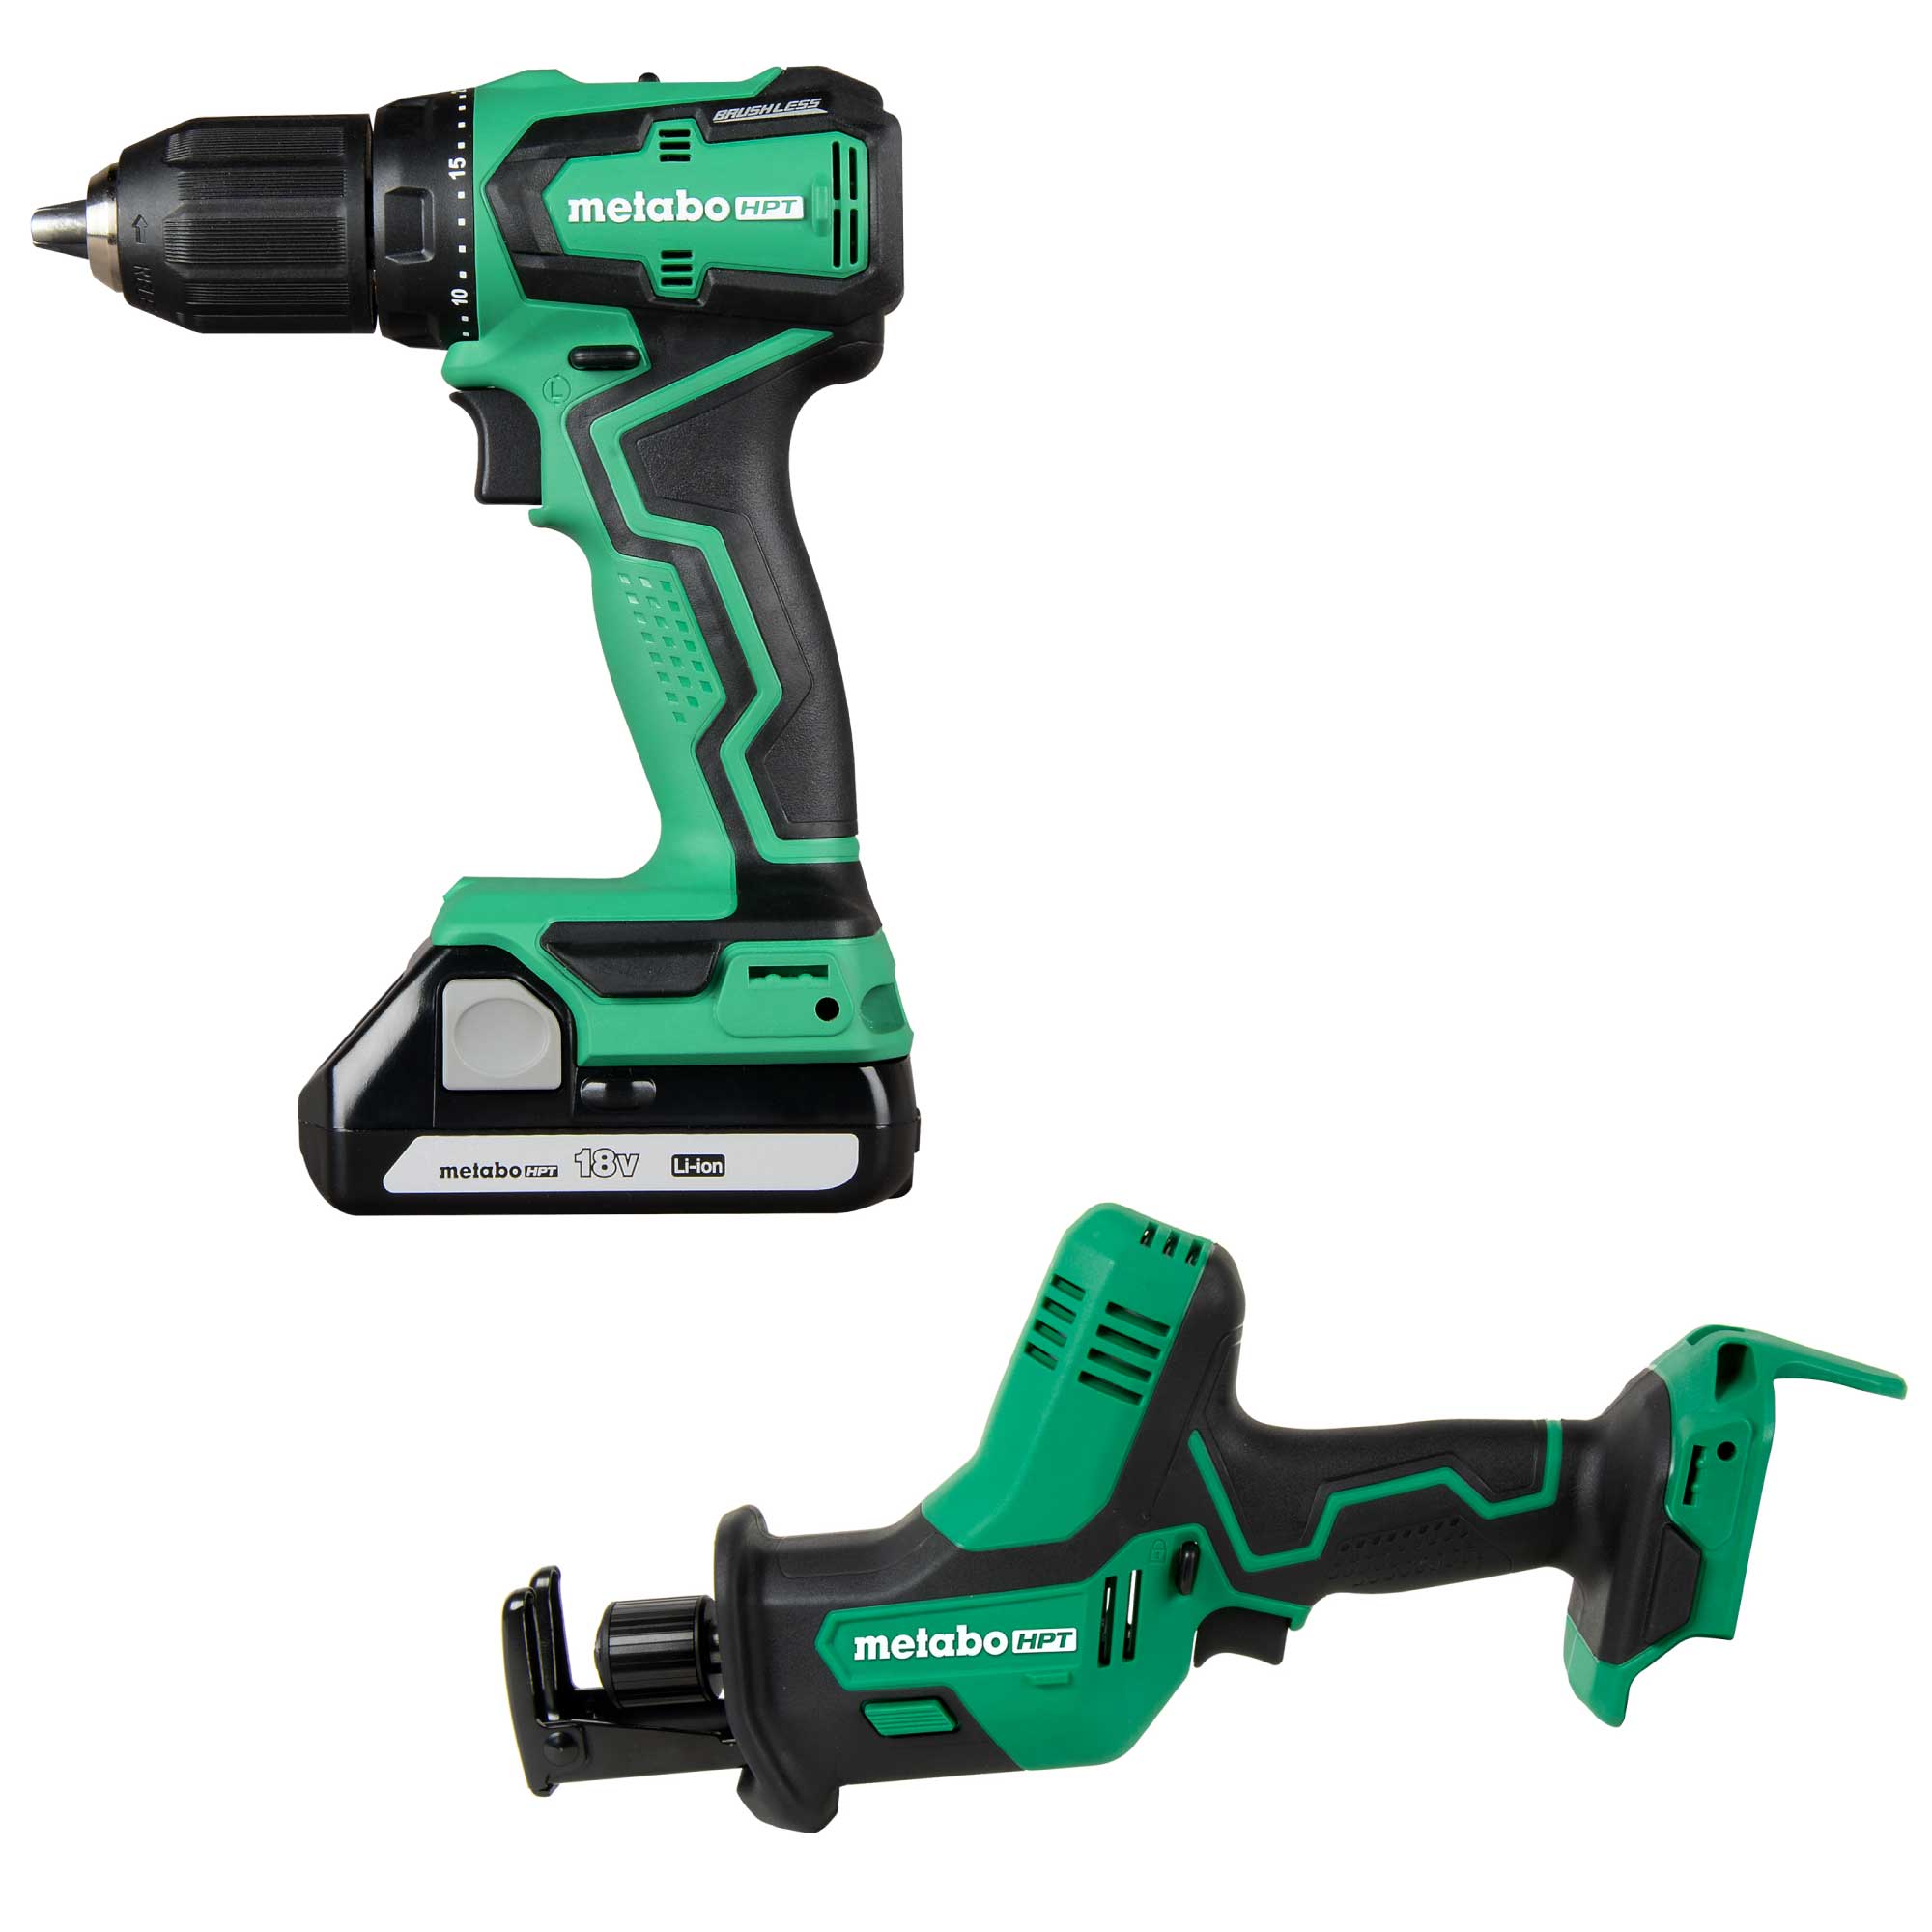 Metabo HPT MultiVolt 18-volt 1/2-in Keyless Brushless Cordless Drill (2-batteries included and Charger included) with MultiVolt 18-volt Variable